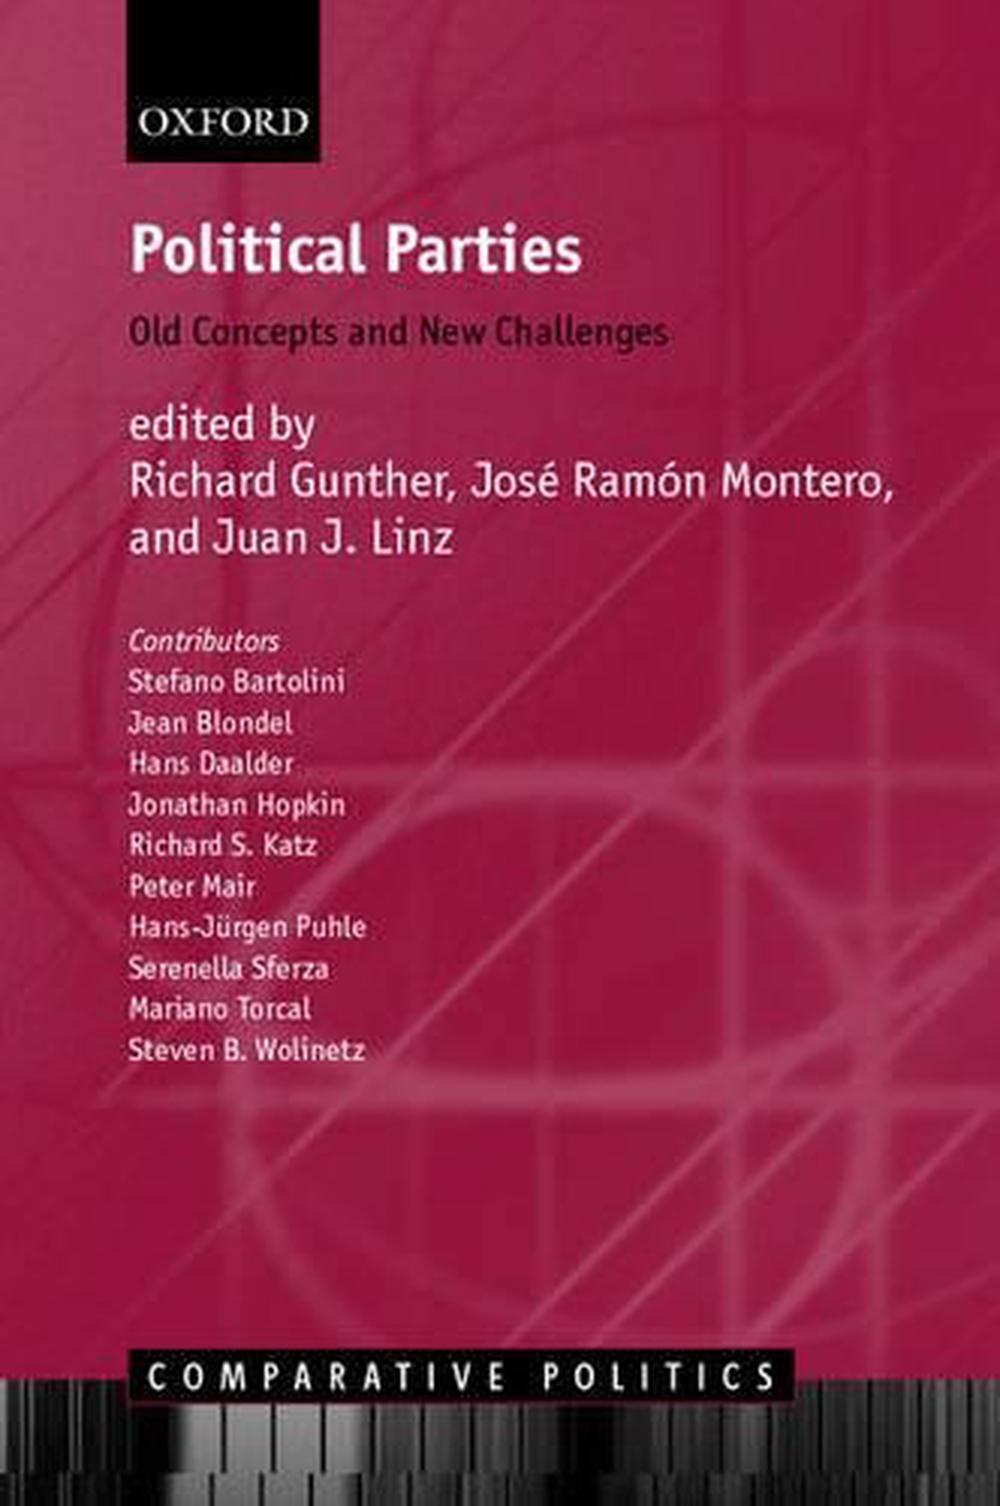 Political Parties Old Concepts and New Challenges by Richard Gunther (English) 9780198296690 eBay